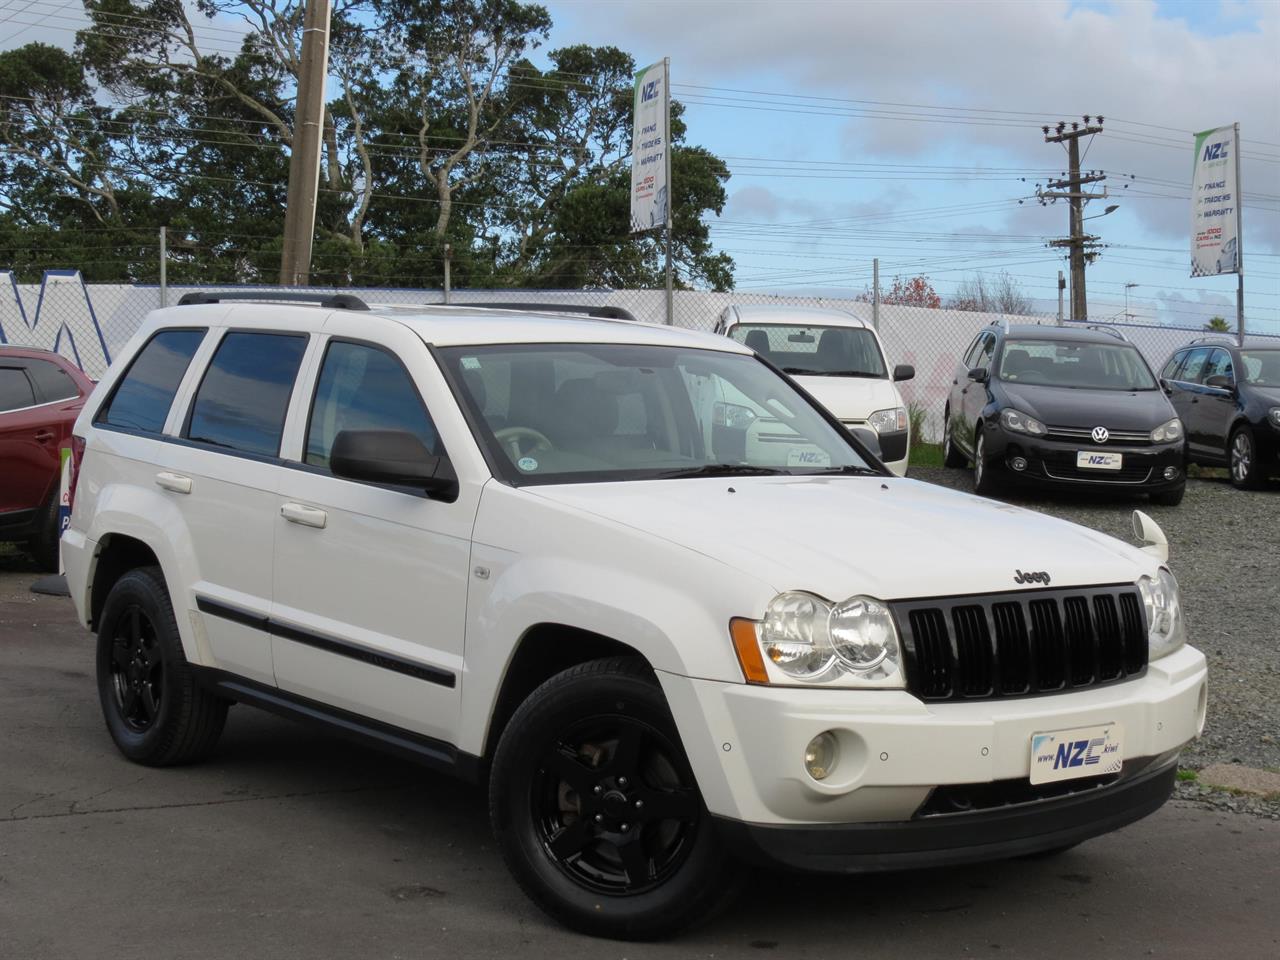 NZC 2007 Jeep Grand Cherokee just arrived to Auckland